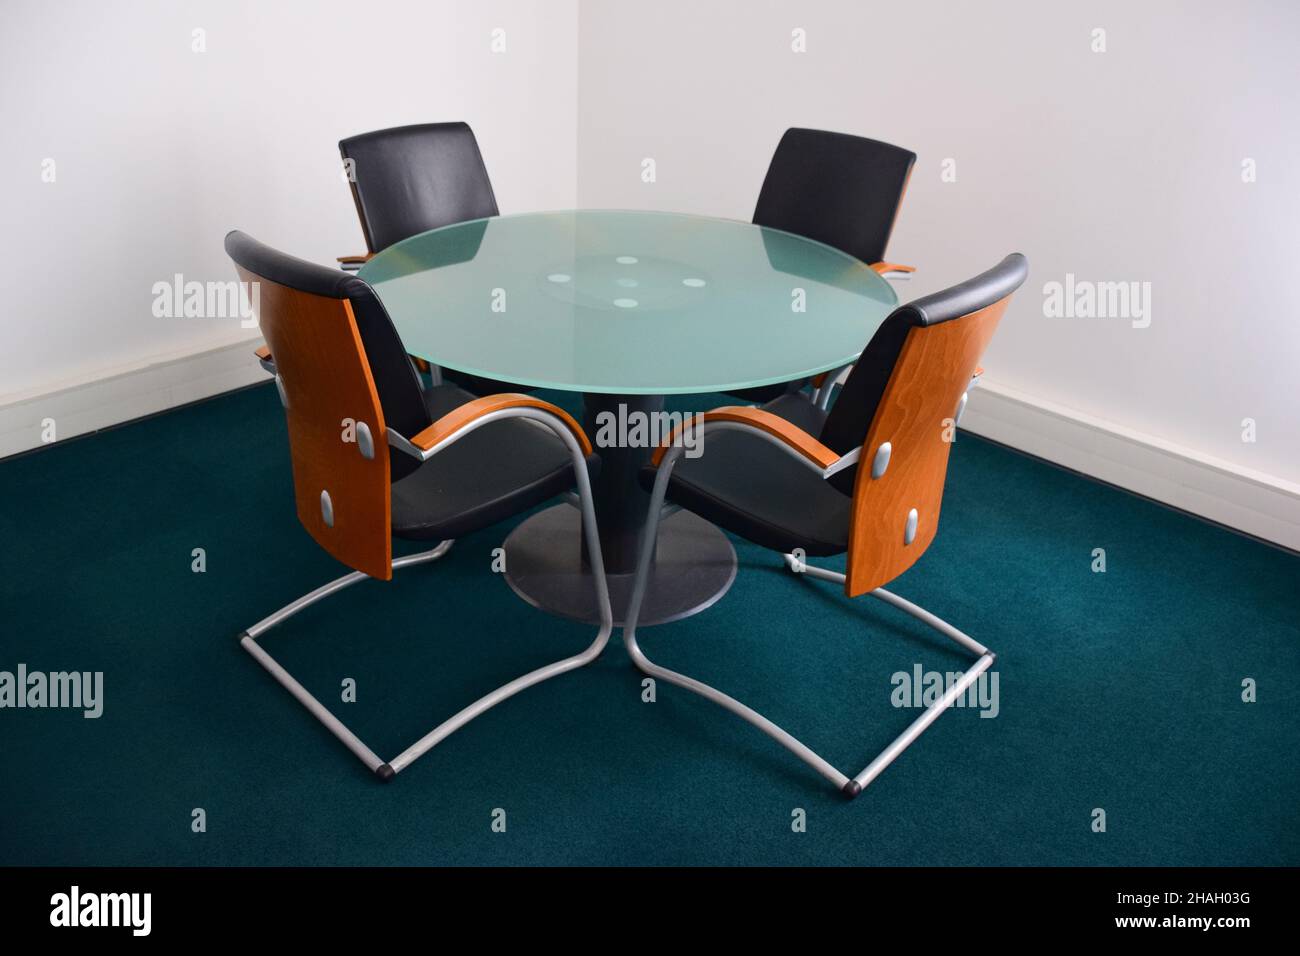 Four empty leather decorative office chairs with wooden backs sit around a glass circular table. Side view Stock Photo